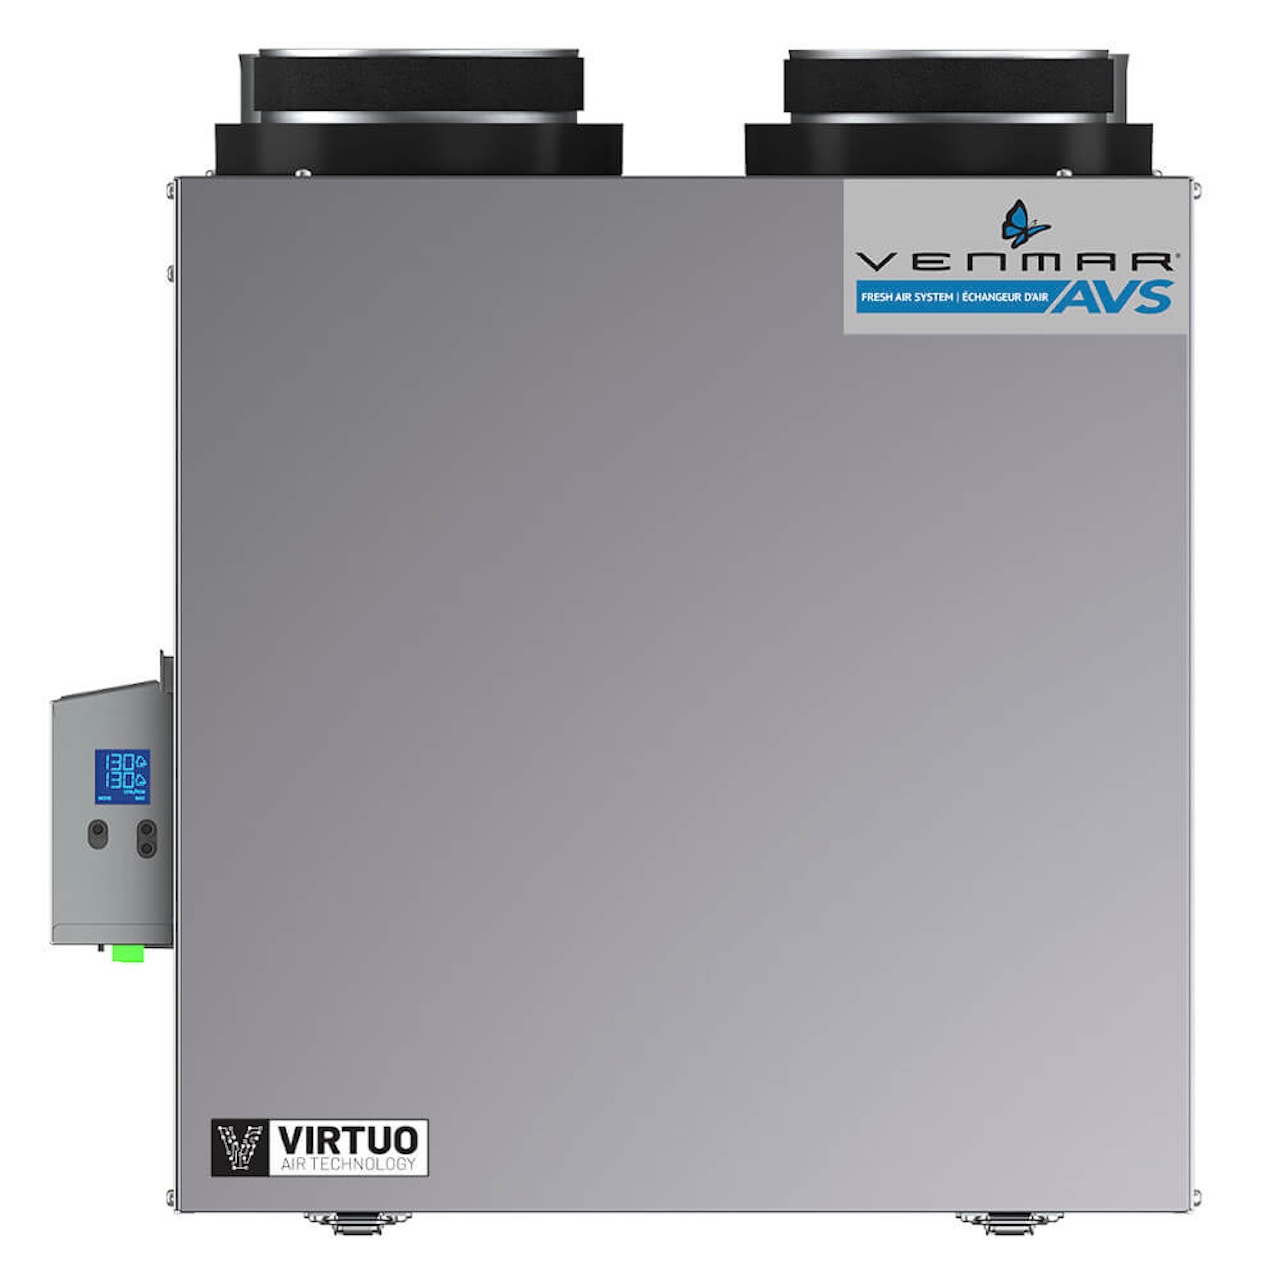 How To Use The Venmar Ventilation System During Winter